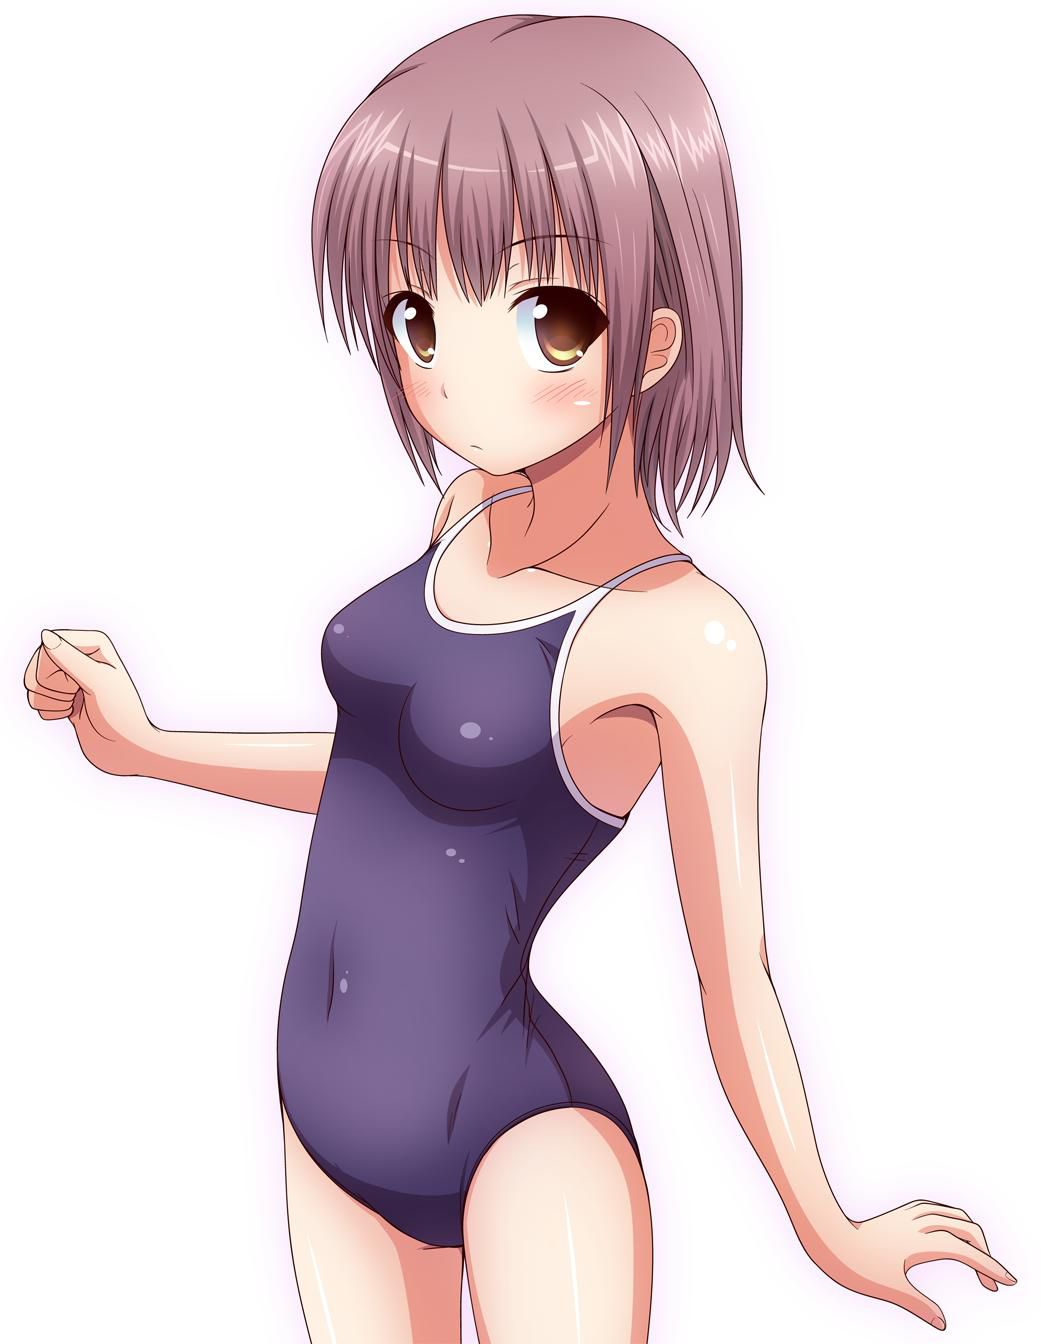 [Two-dimensional] I want to see the swimsuit of cute girl, please erotic images 14